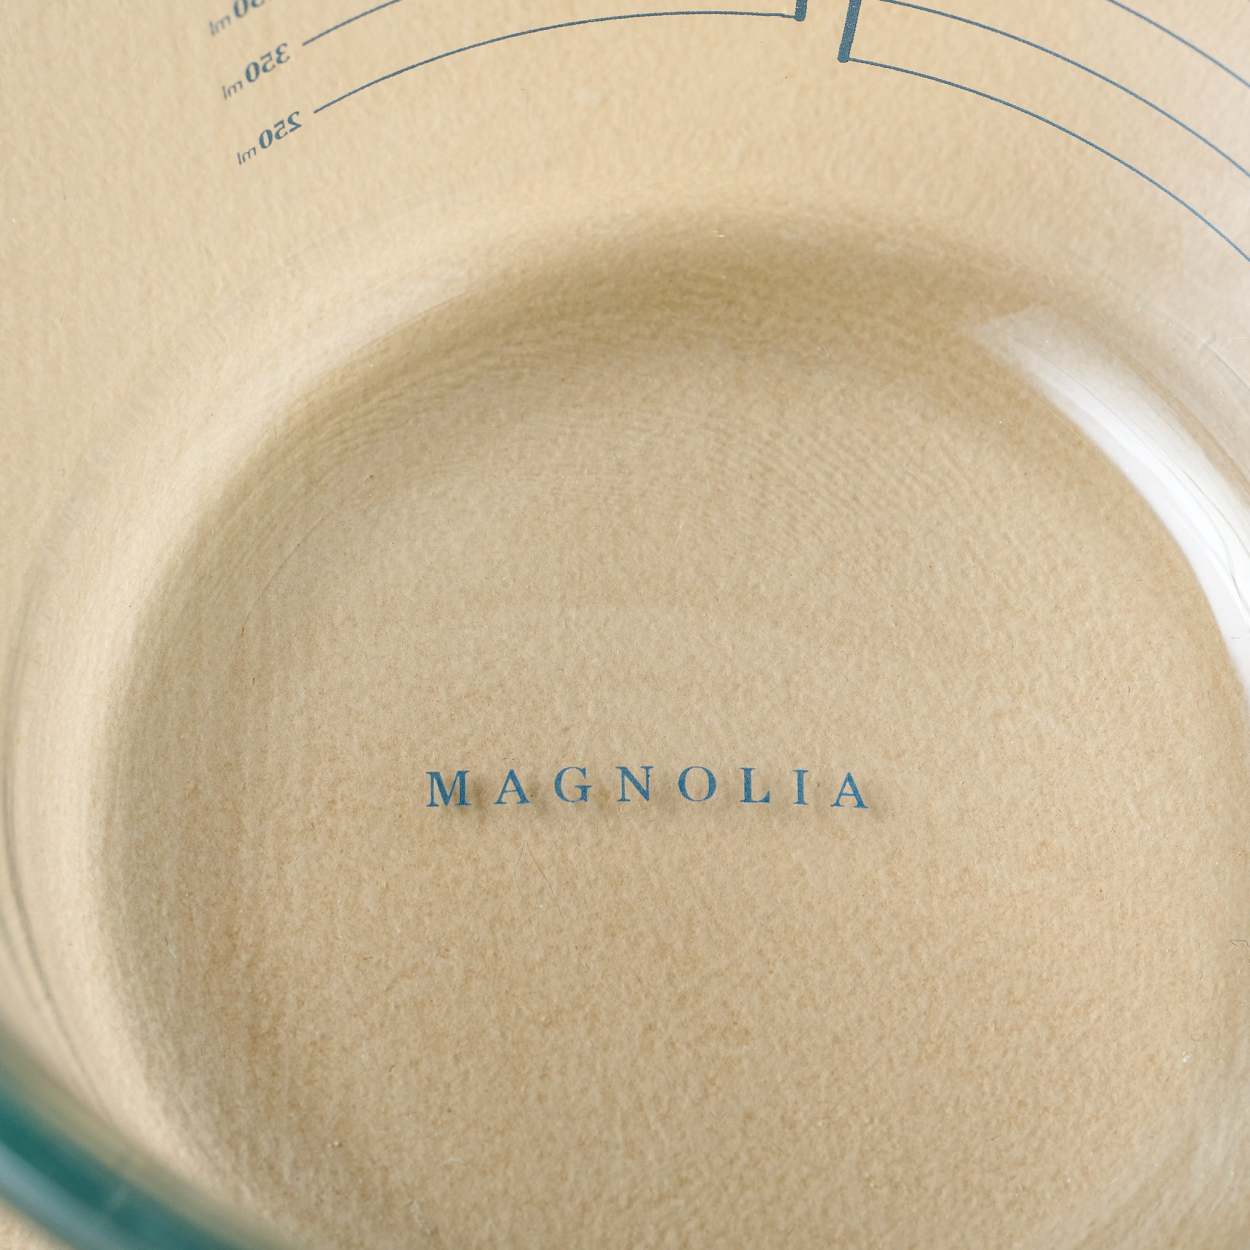 Vintage Inspired Stainless Measuring Cups - Magnolia